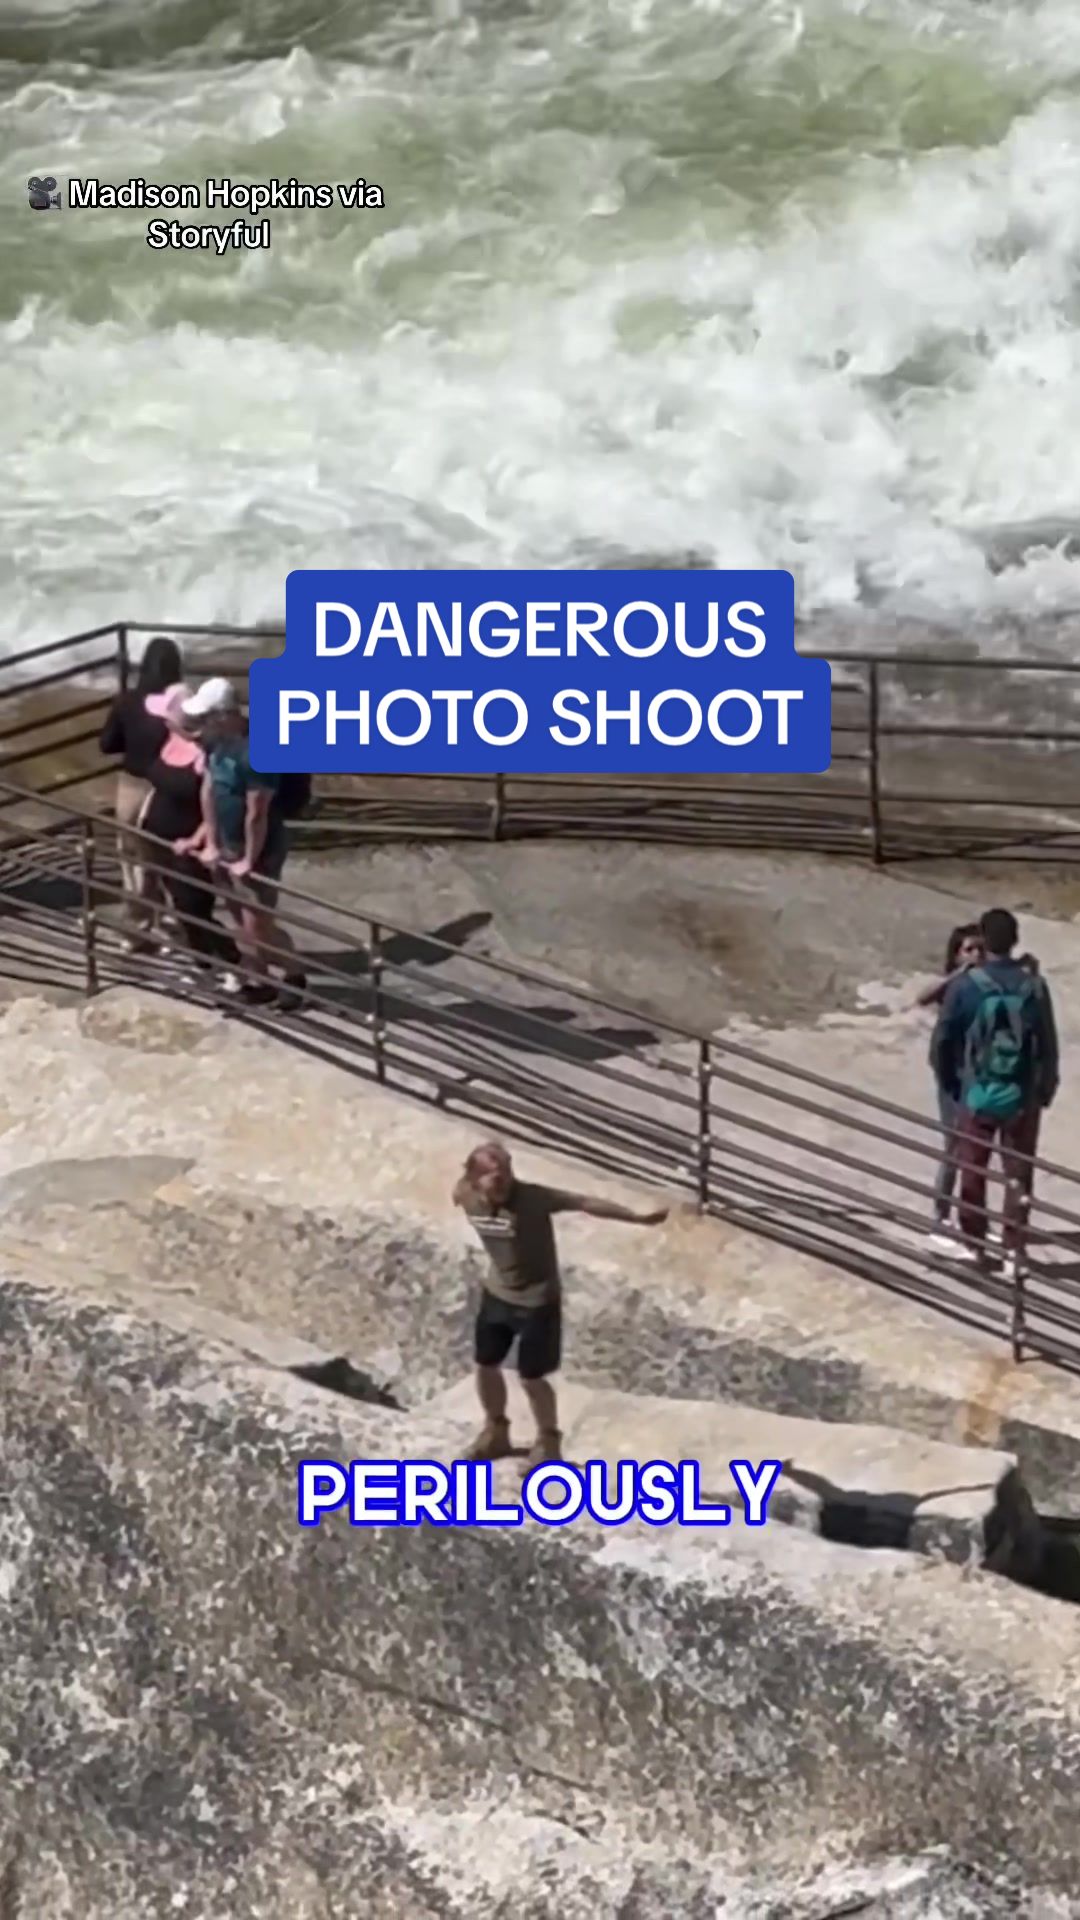 A group of tourists JUMPED the barrier at Yosemite National Park to take photos just inches away from a 317-foot drop. Video shows one of the men crouching on the precipice of Vernal Falls as the others take his photo. 🎥 Madison Hopkins via Storyful #yosemite #waterfall #tourists #tourism #california #news